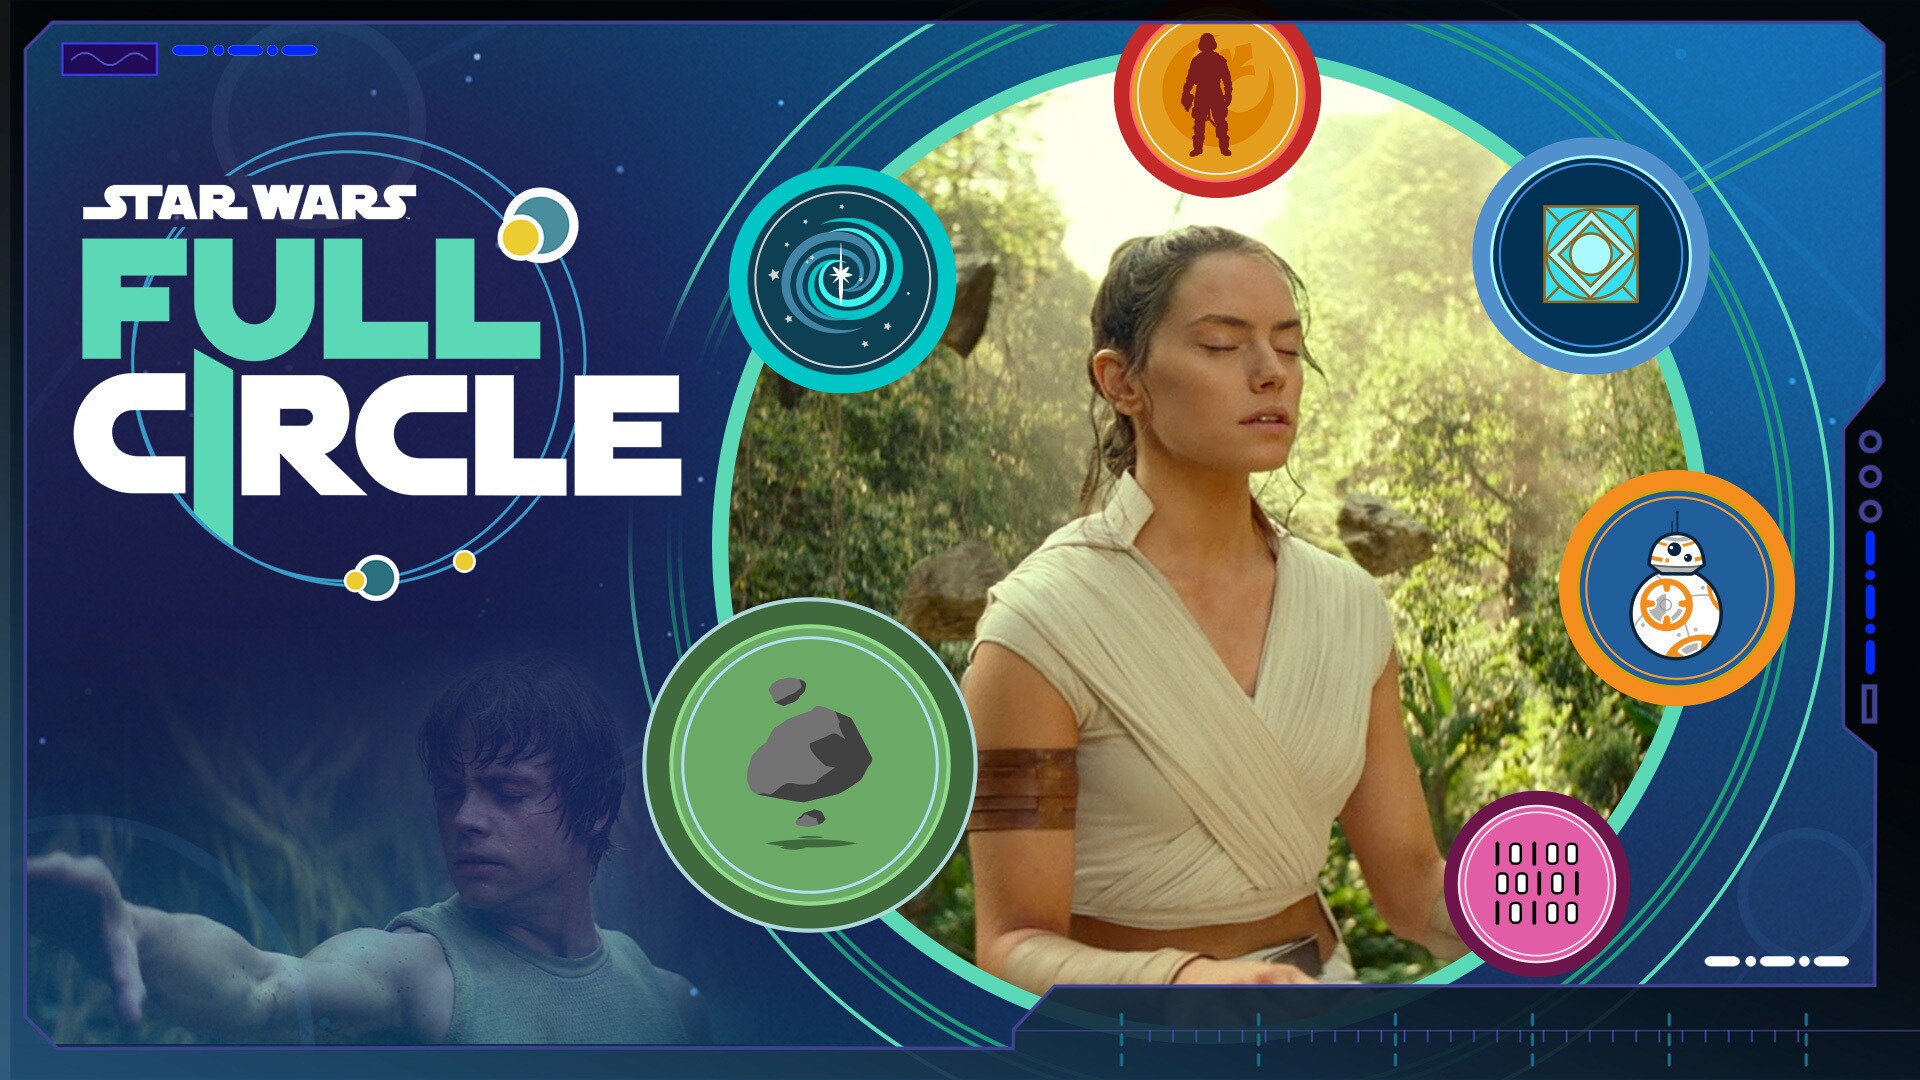 The Force | Star Wars Full Circle